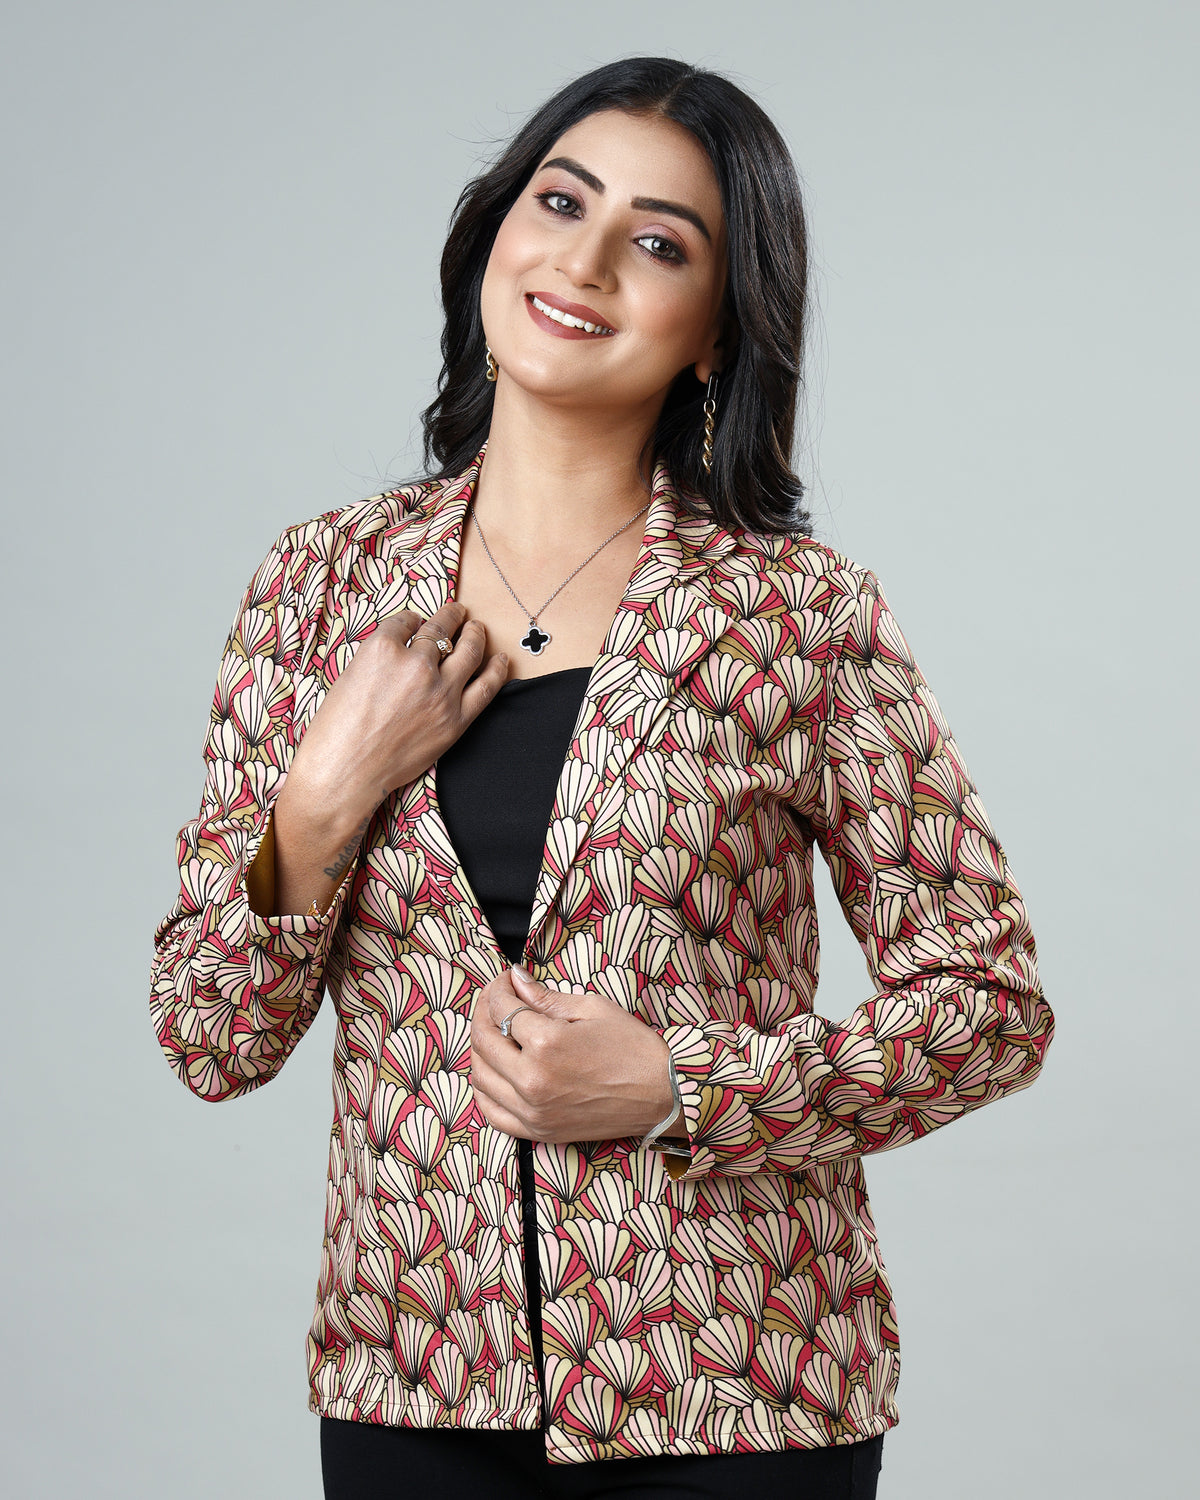 Own Your Look: Women's Floral Showoff Jacket